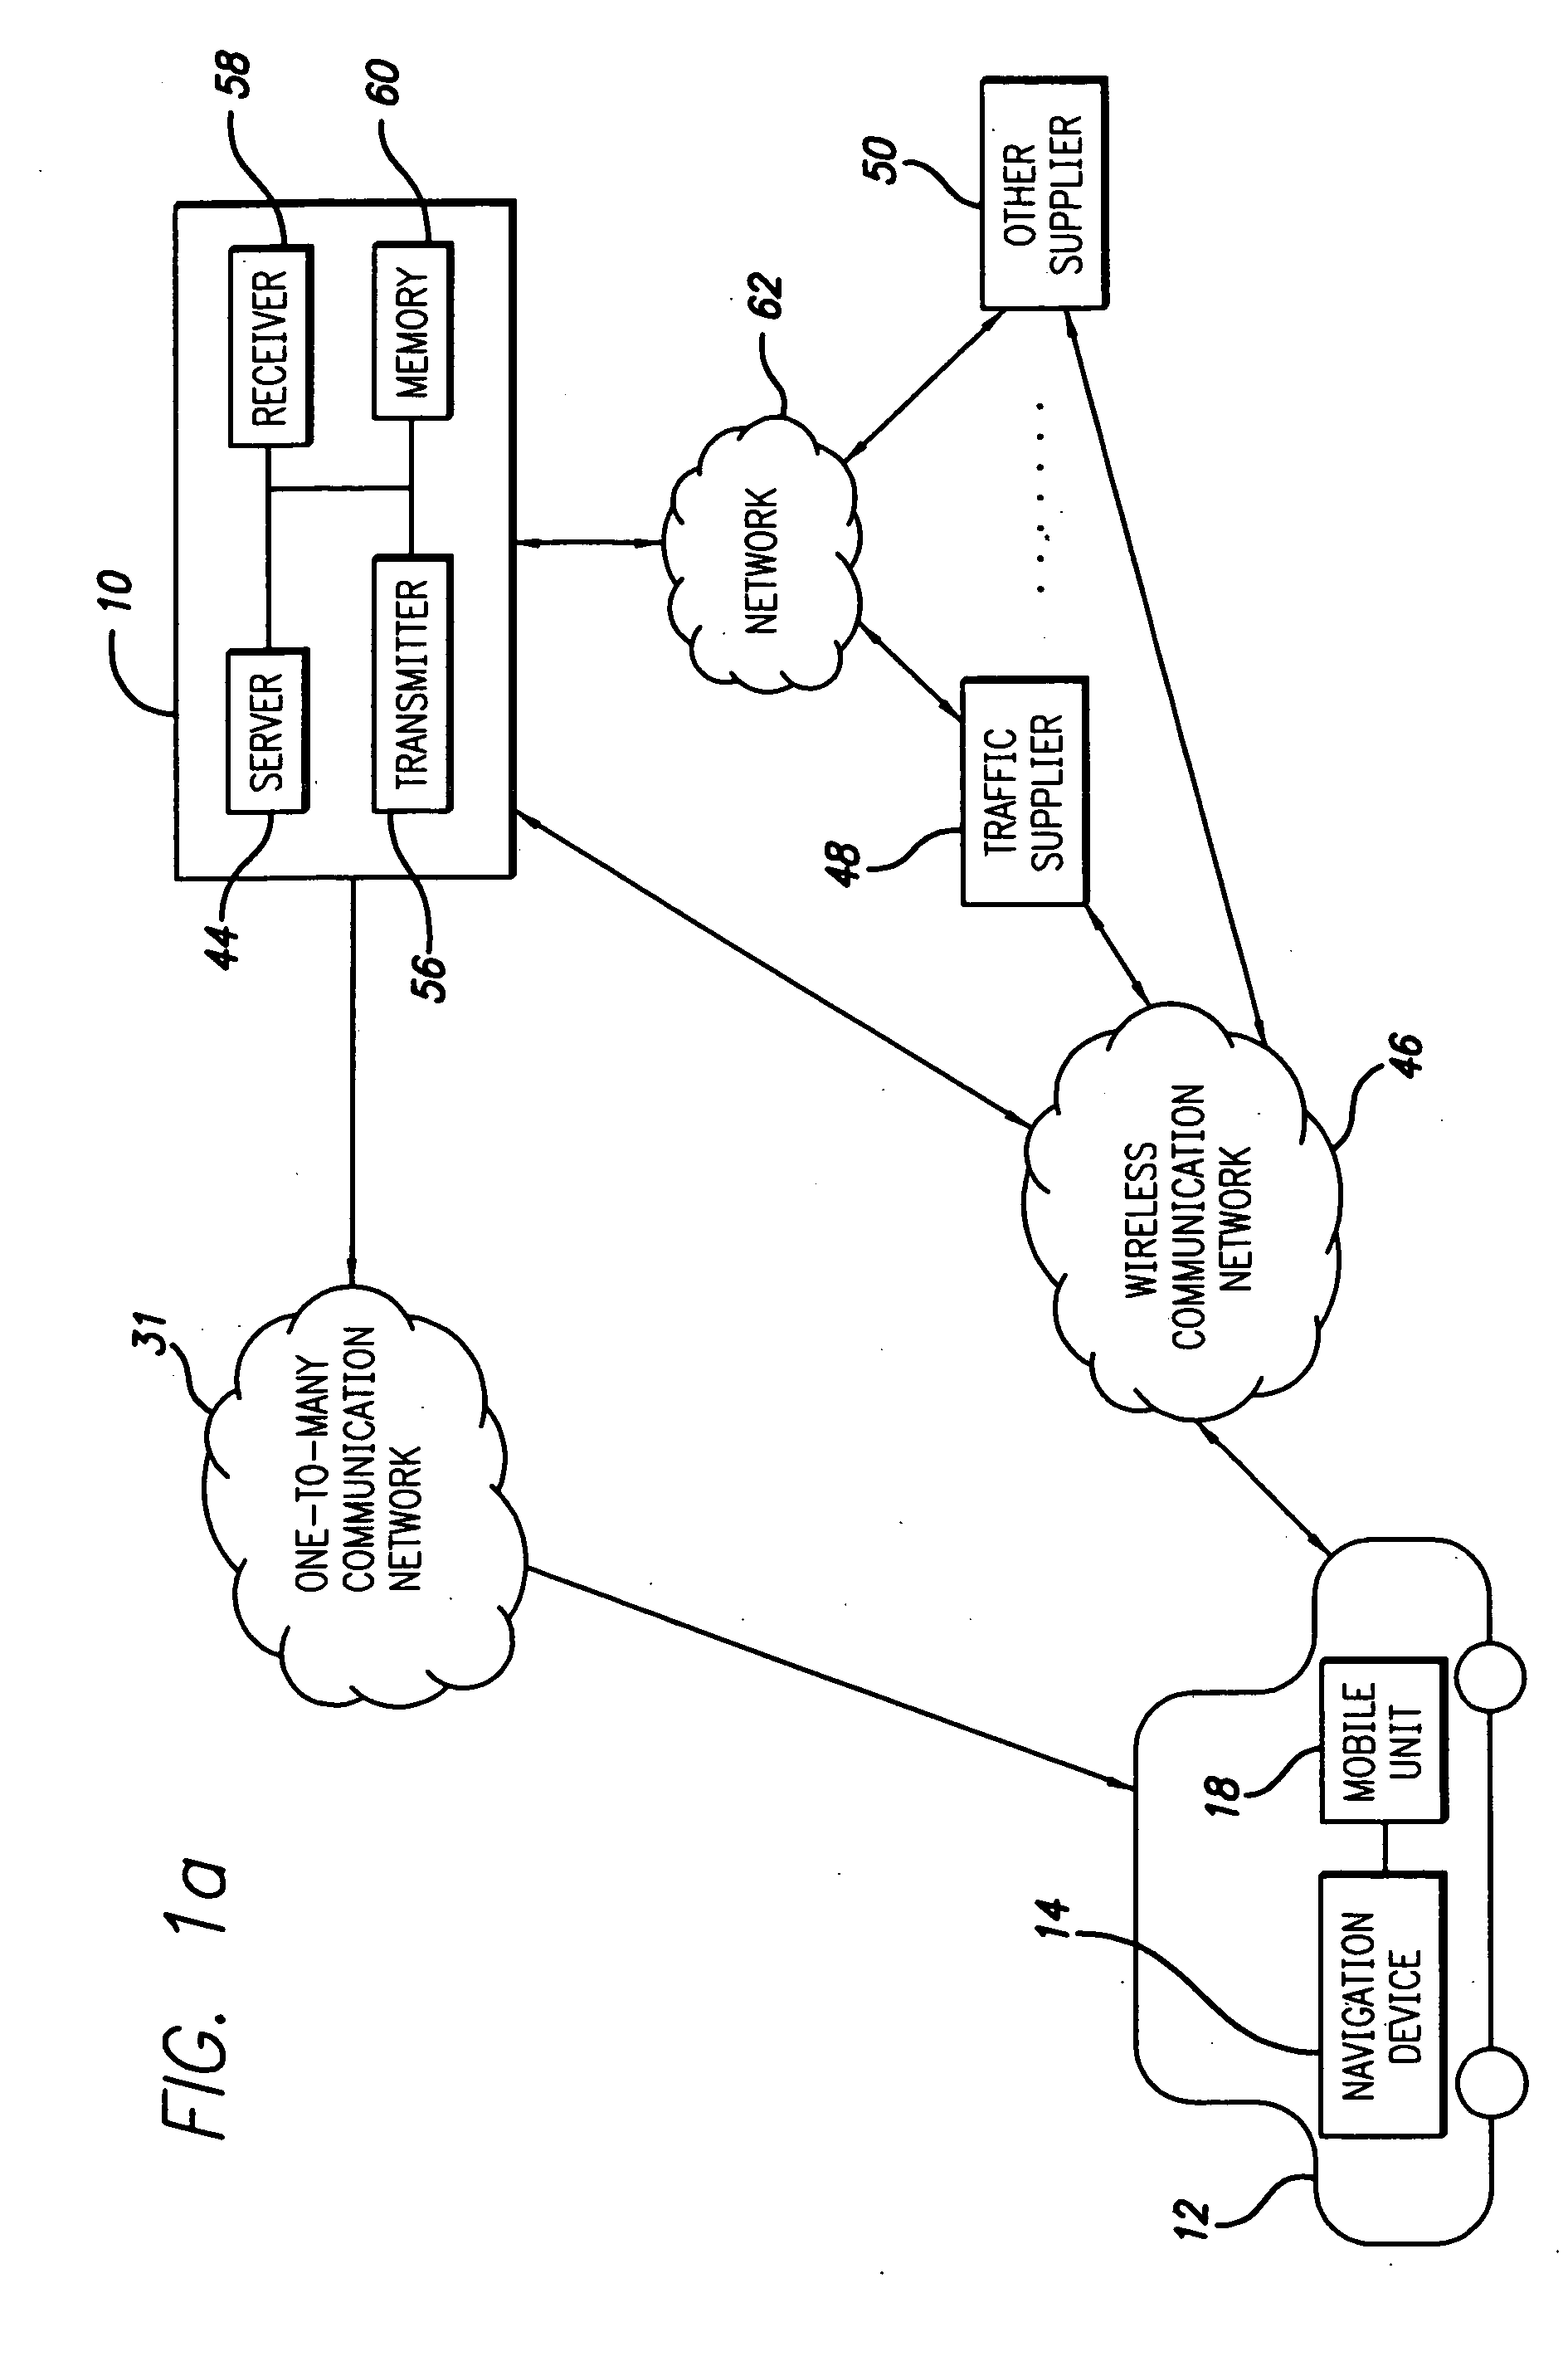 Bandwidth and memory conserving methods for a vehicle navigation system